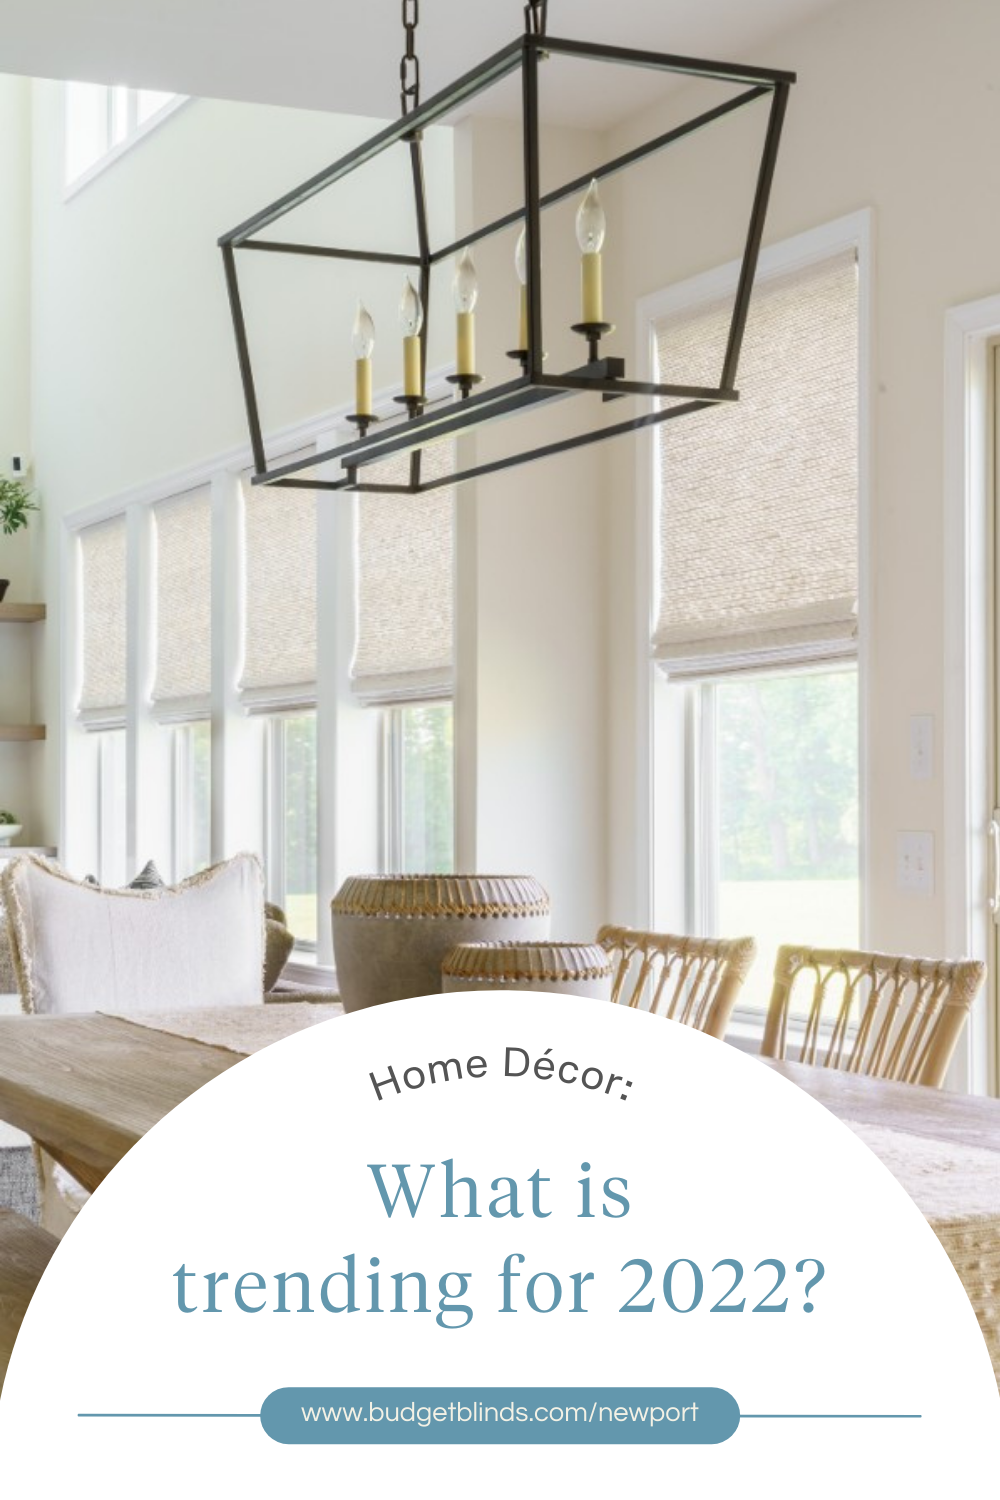 What are our customers asking for the most right now? Roman shades and roller shades in natural and sustainable materials like bamboo and woven wood.